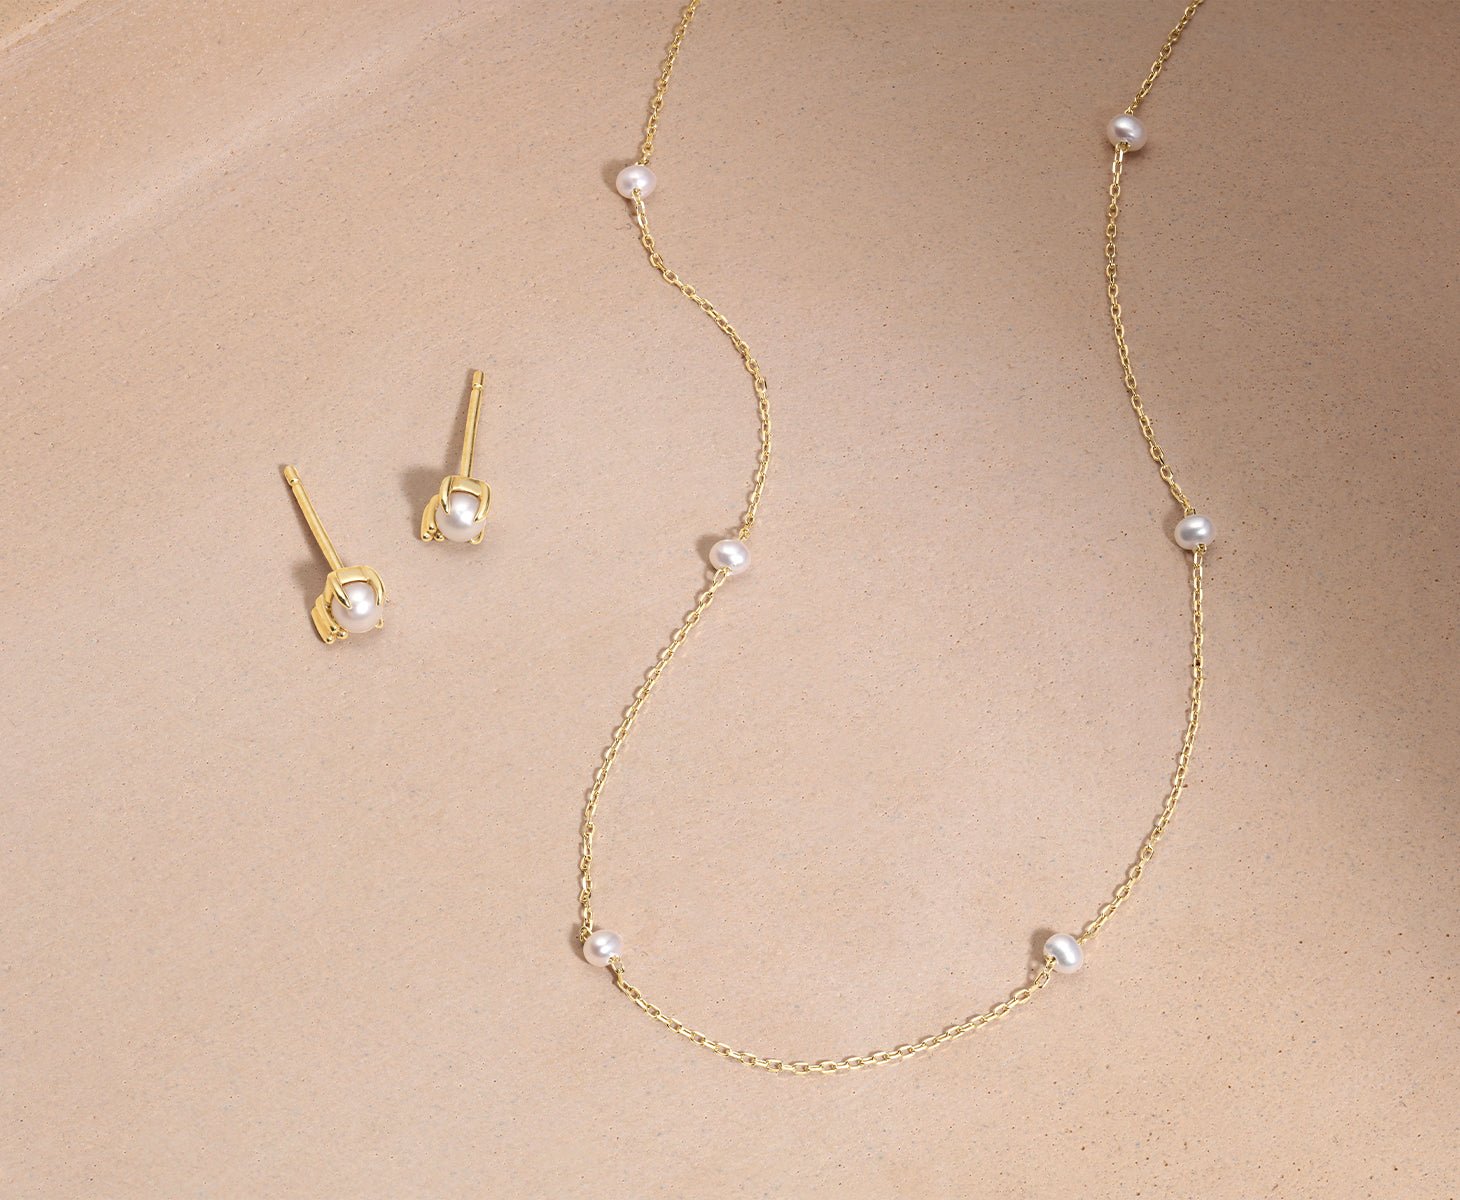 14k gold genuine pearl necklaces and earrings